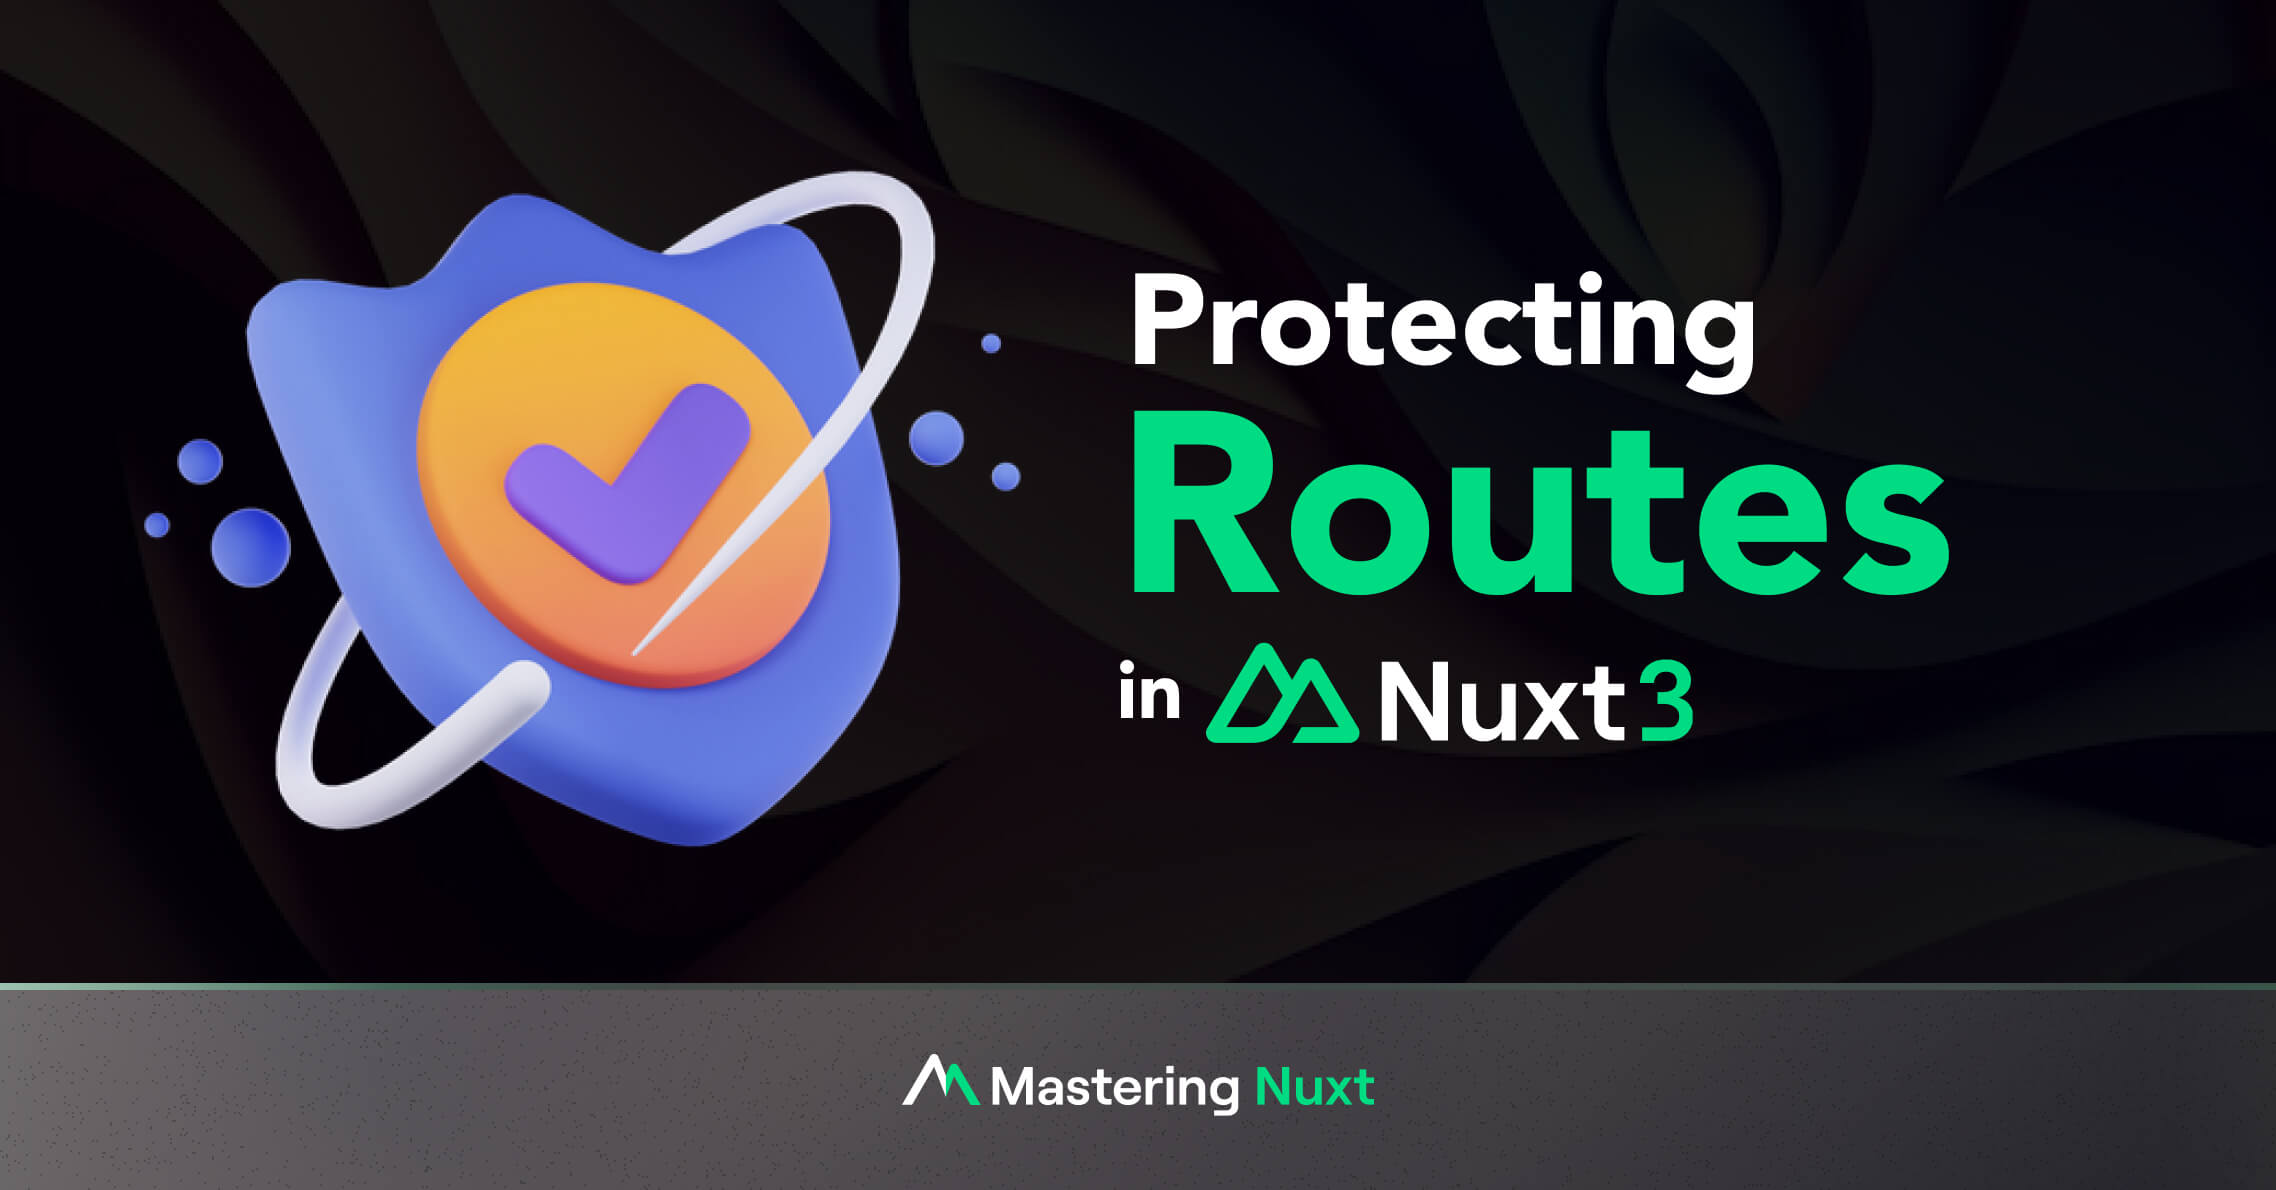 https://masteringnuxt.com/images/blog/protecting-routes-in-nuxt-3/thumbnail.jpg